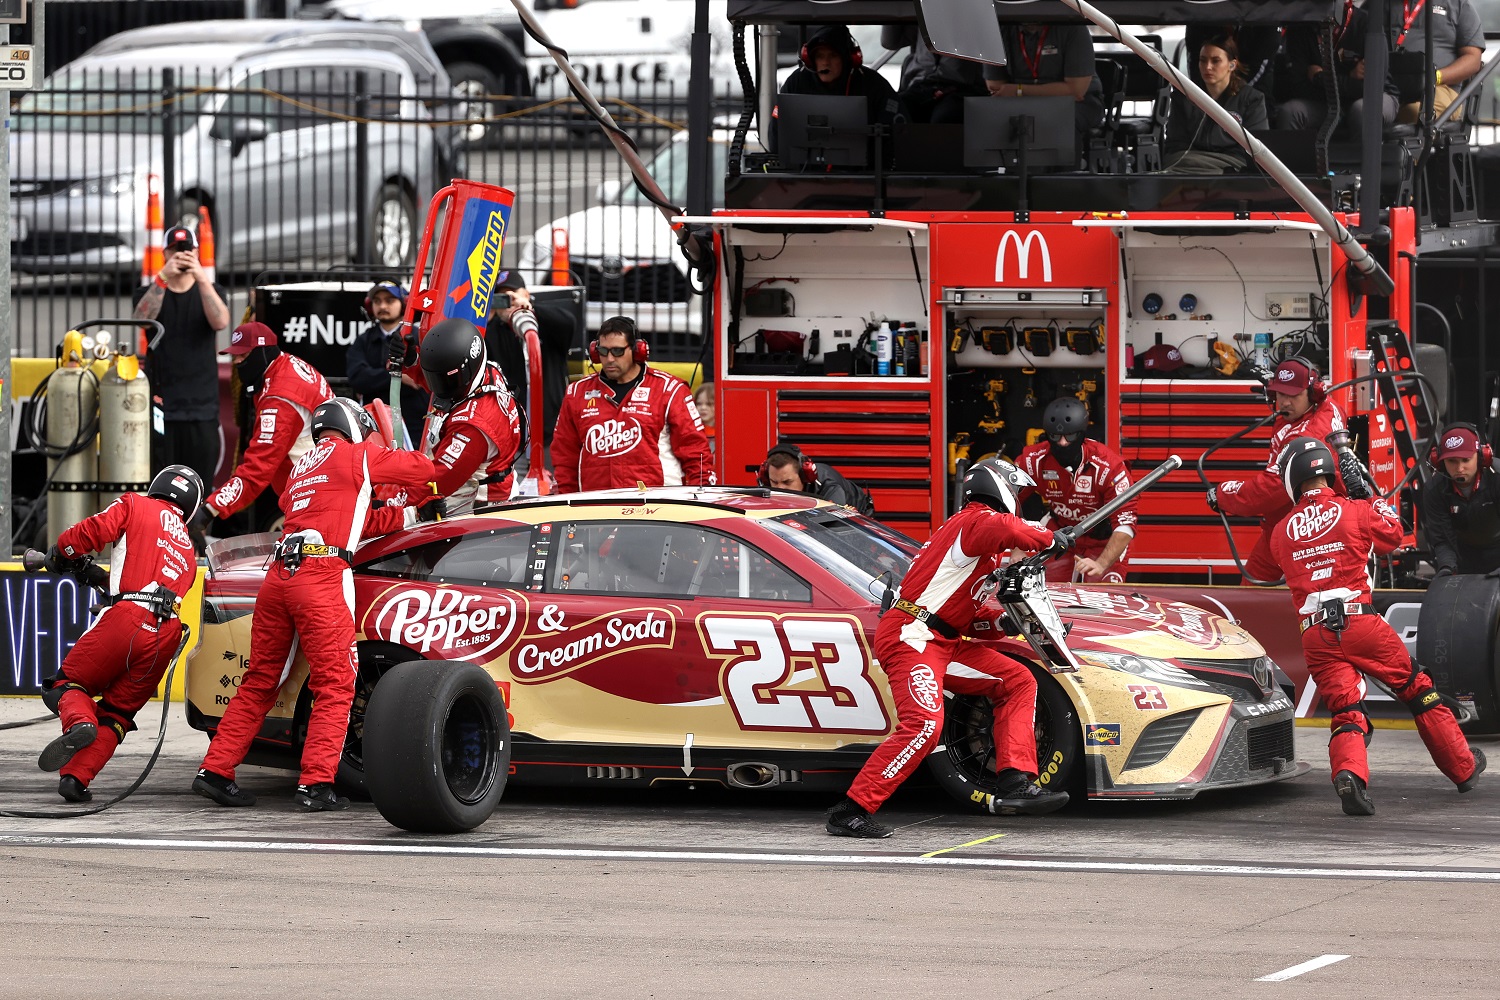 Joe Gibbs Racing Is Feeling the Pressure to Fix a Major Problem Affecting Another Team